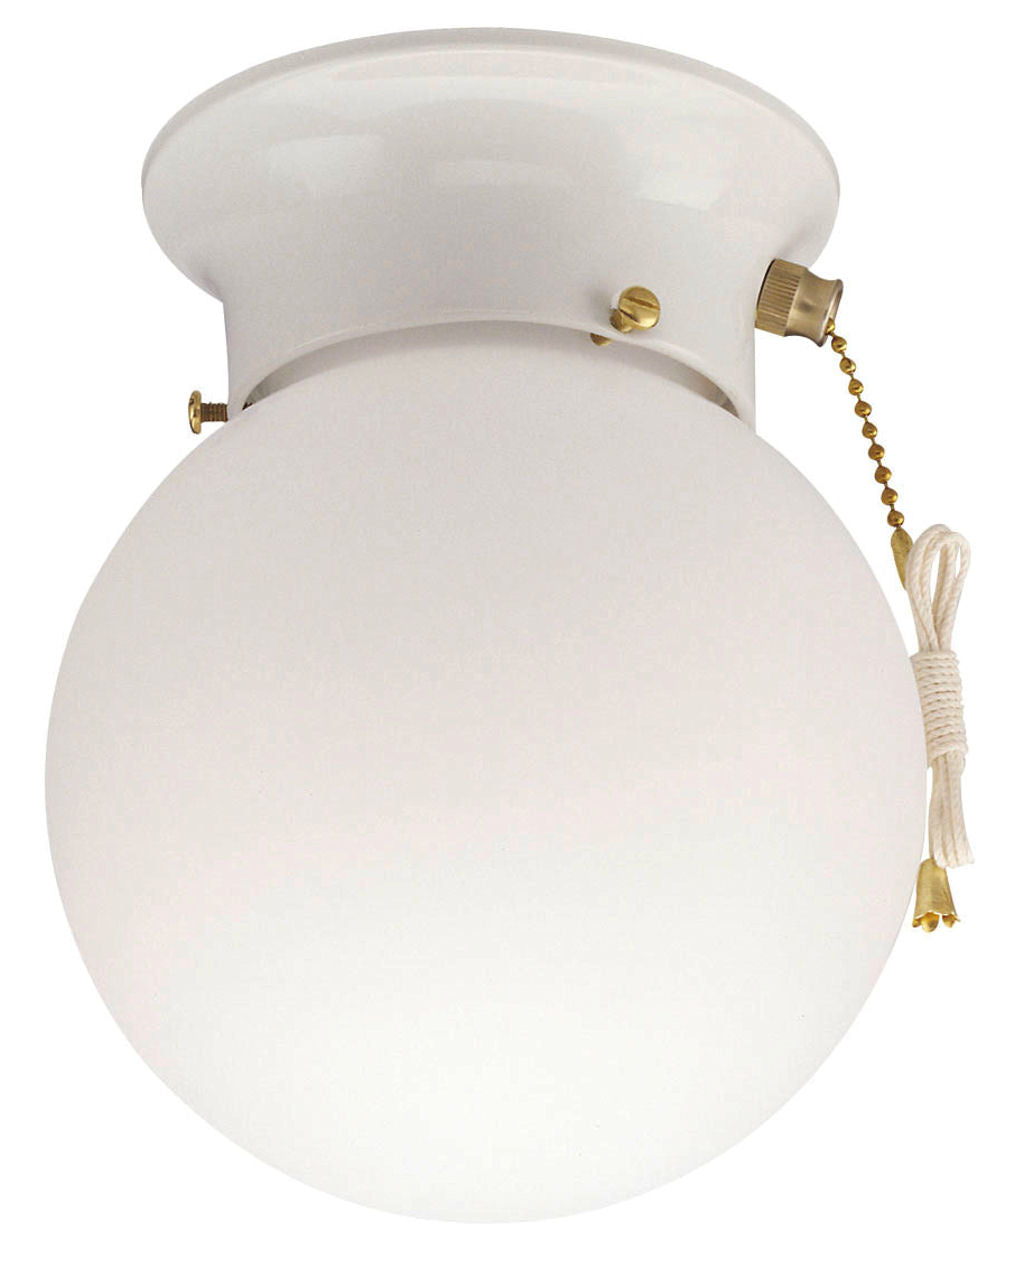 buy ceiling light fixtures at cheap rate in bulk. wholesale & retail outdoor lighting products store. home décor ideas, maintenance, repair replacement parts